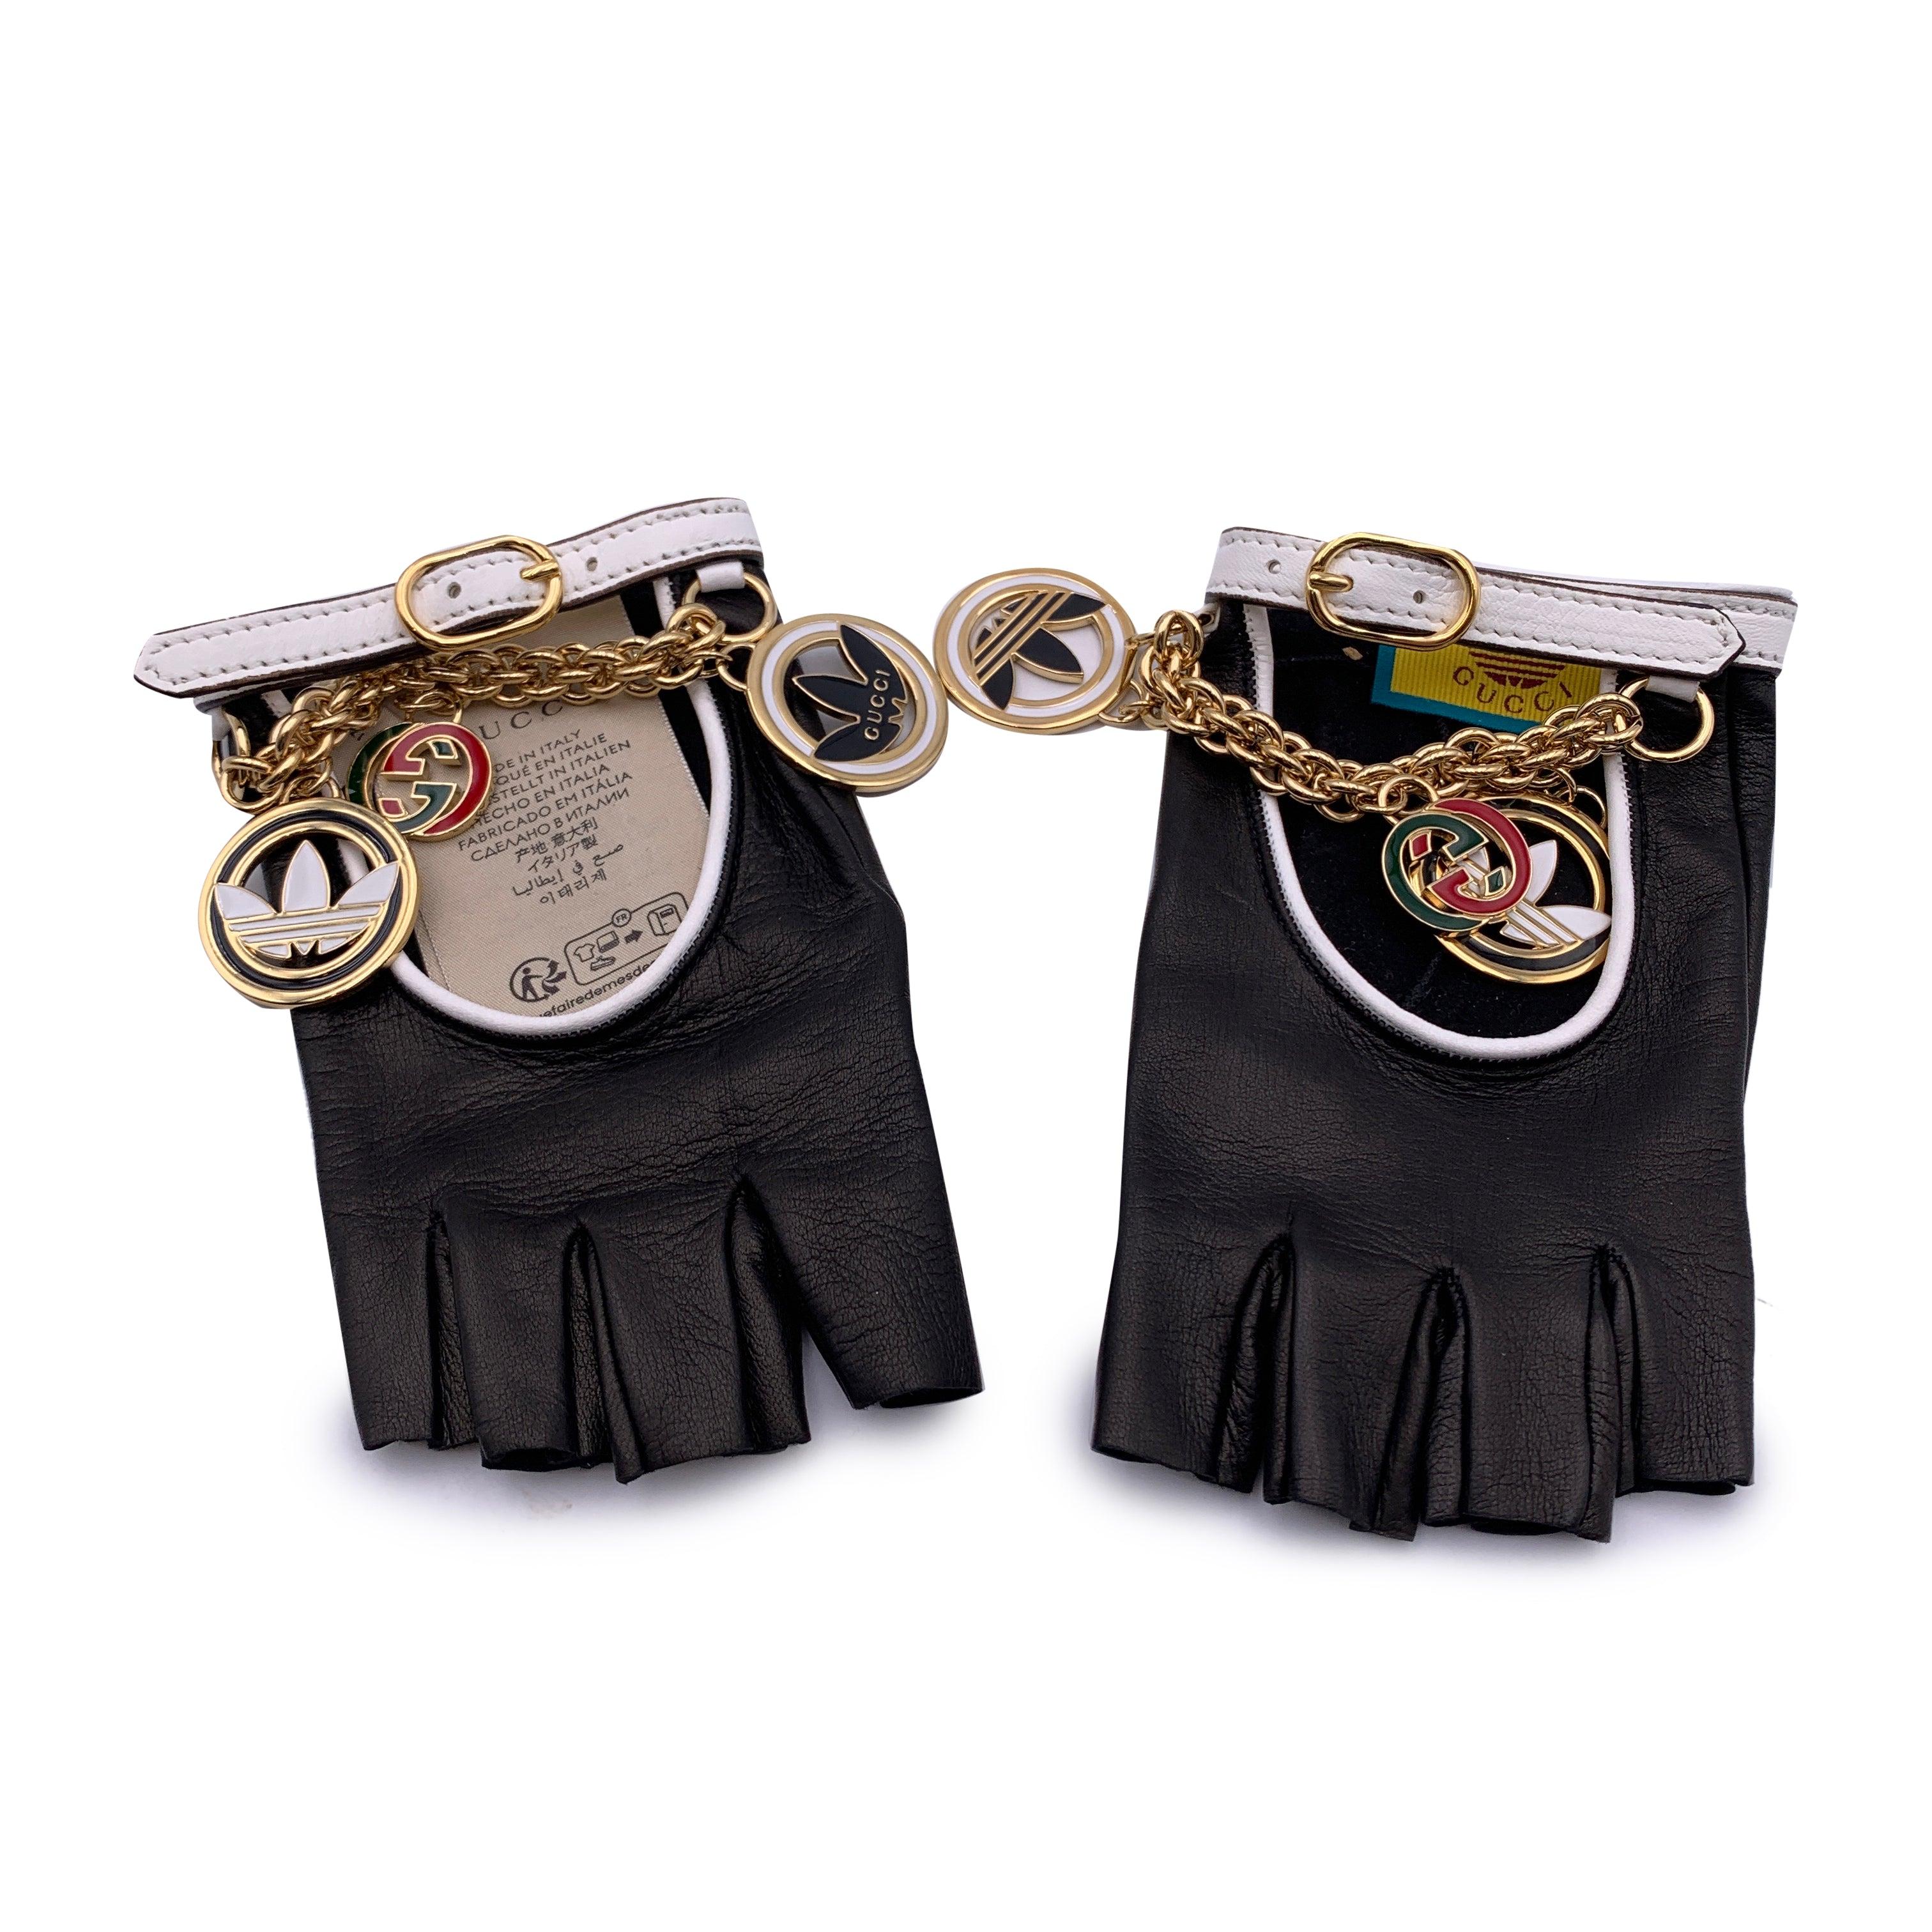 Beautiful black leather driver fingerless gloves from the Gucci x Adidas collection. They feature gold metal chain, enamel Trefoil and Interlocking G details. Black leather with white leather trim. Driver gloves-inspired opening. Adjustable leather